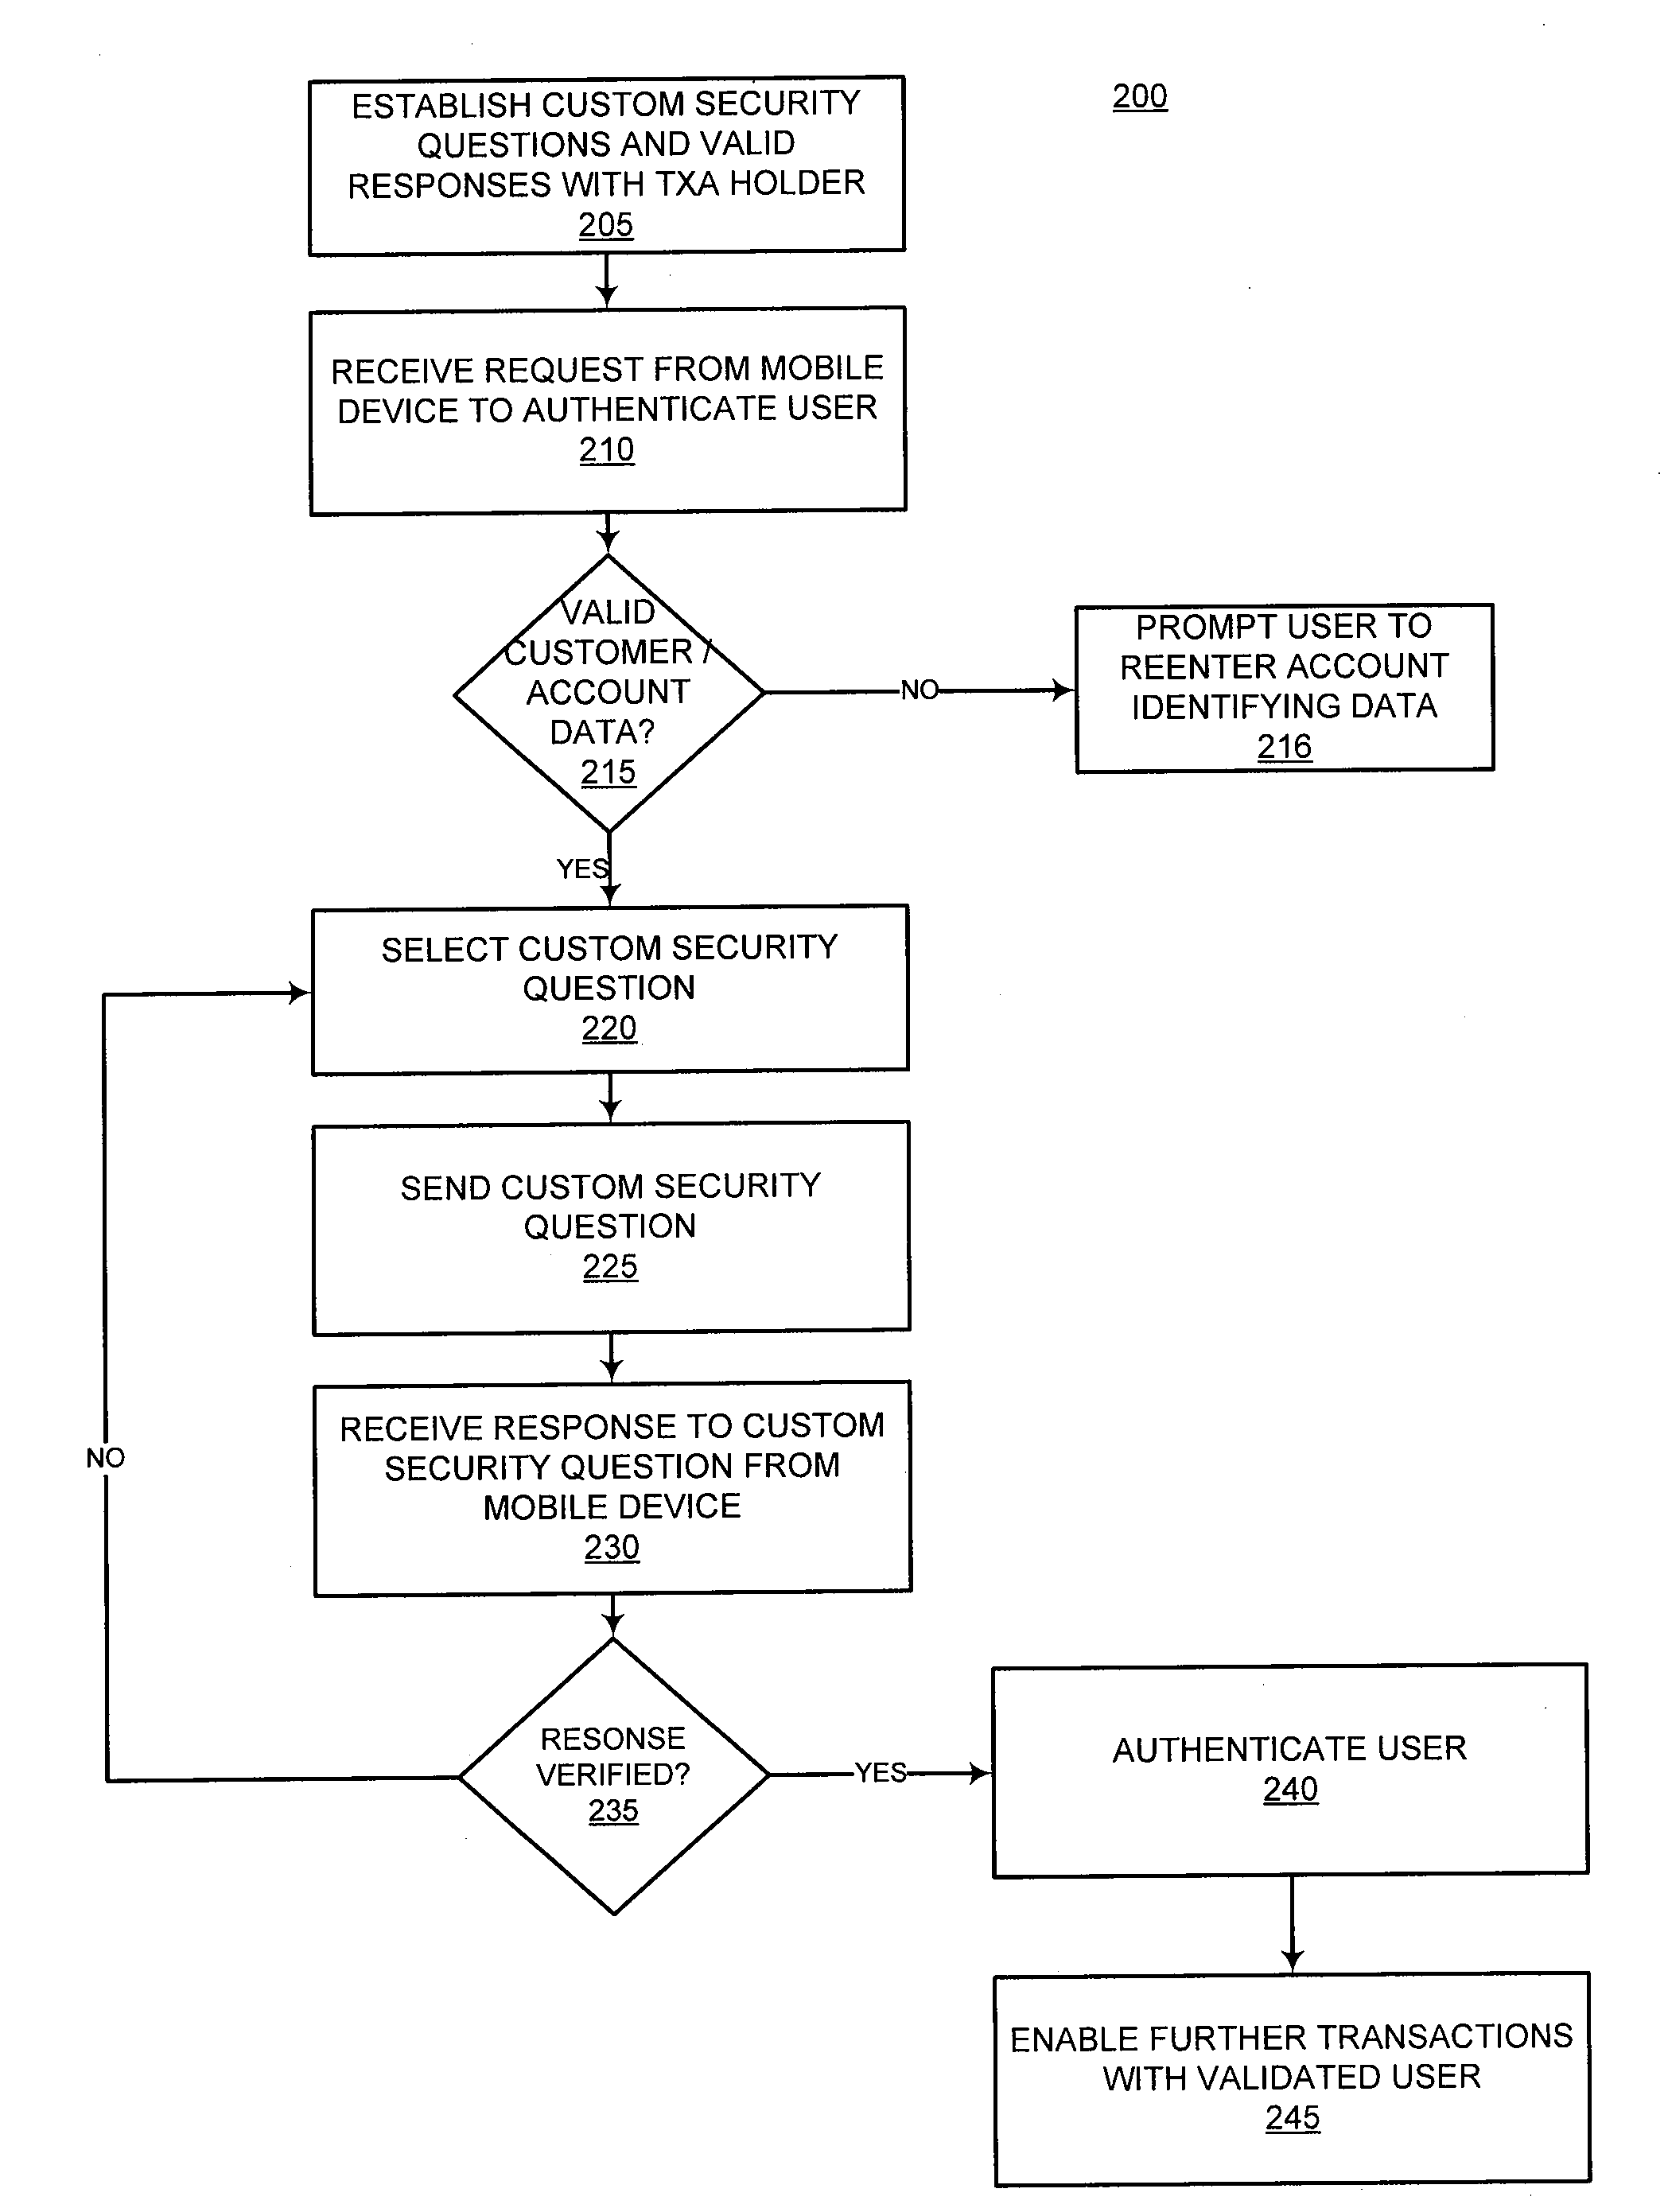 Dynamic account authentication using a mobile device